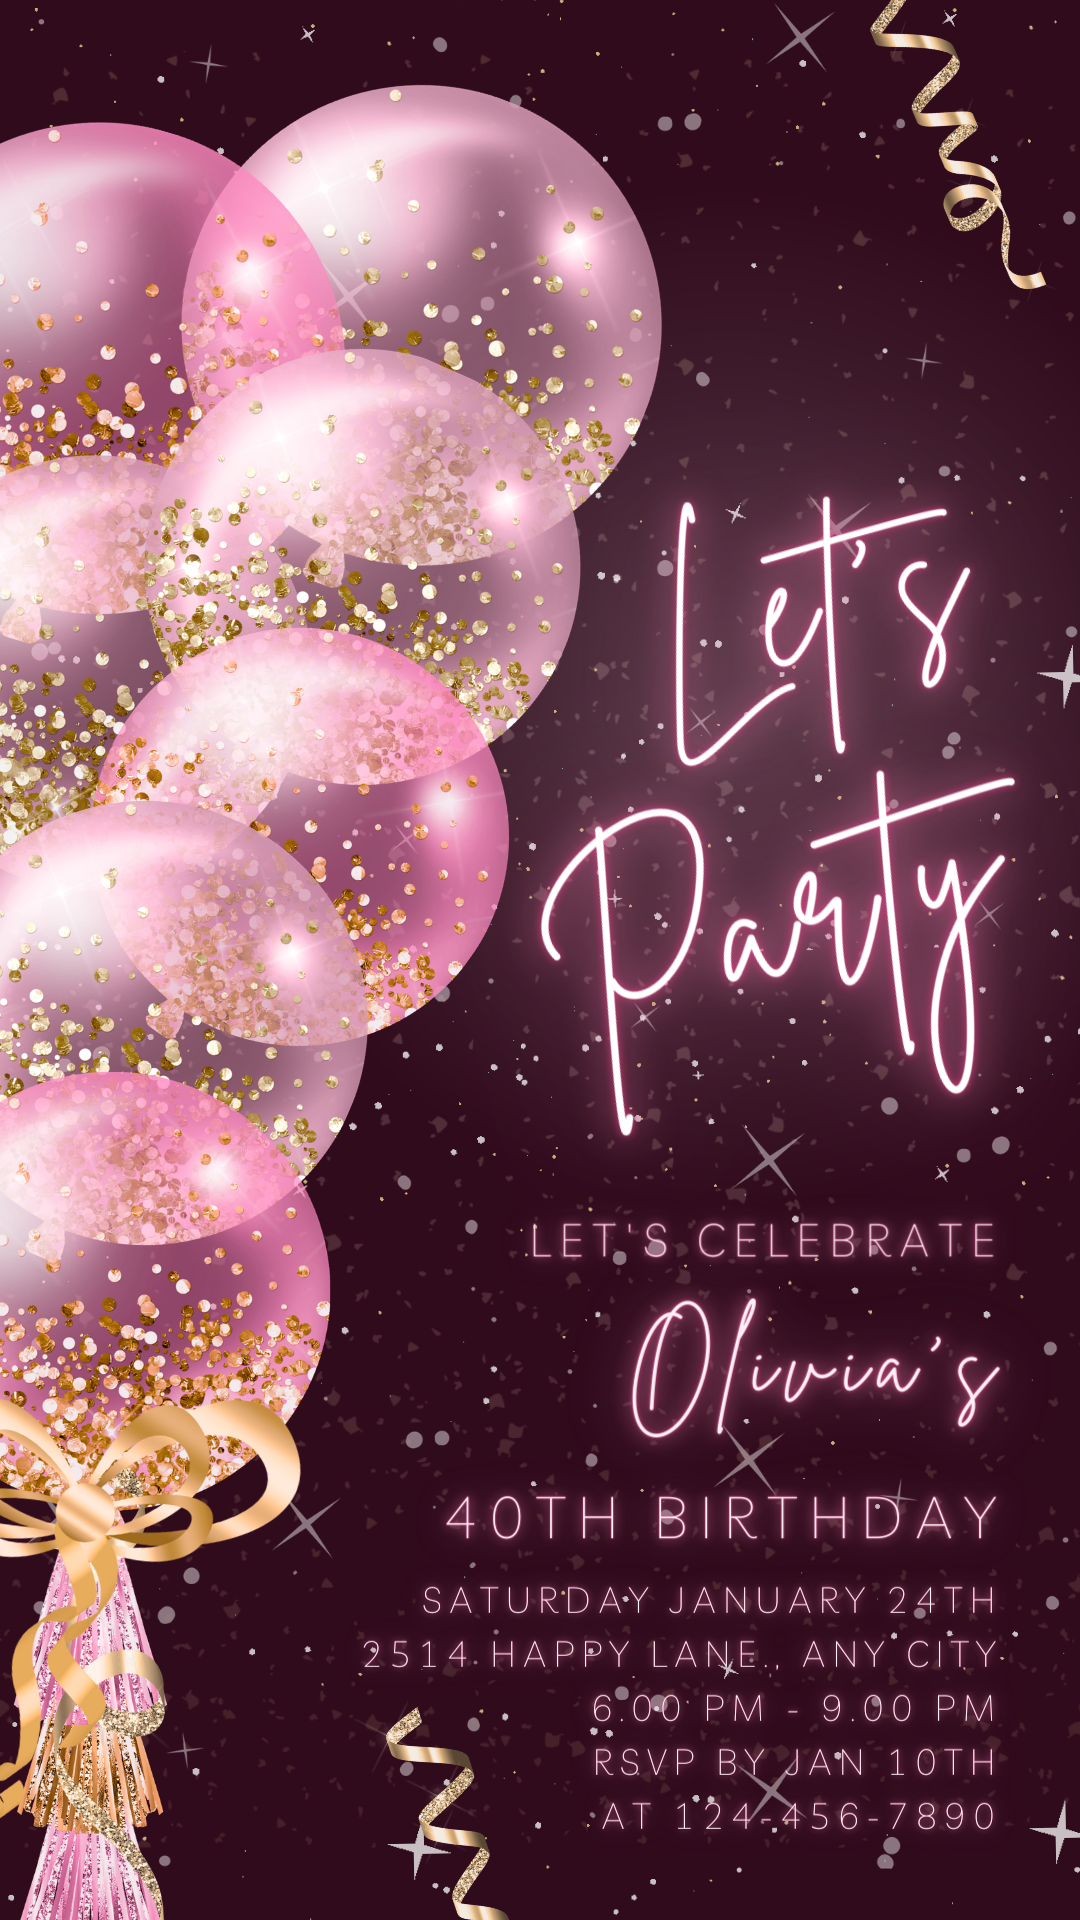 Let's Party Animated Invite for any Event Celebration, Editable Video Template, Birthday invitation for any Age | Rose Gold Pink E-vite